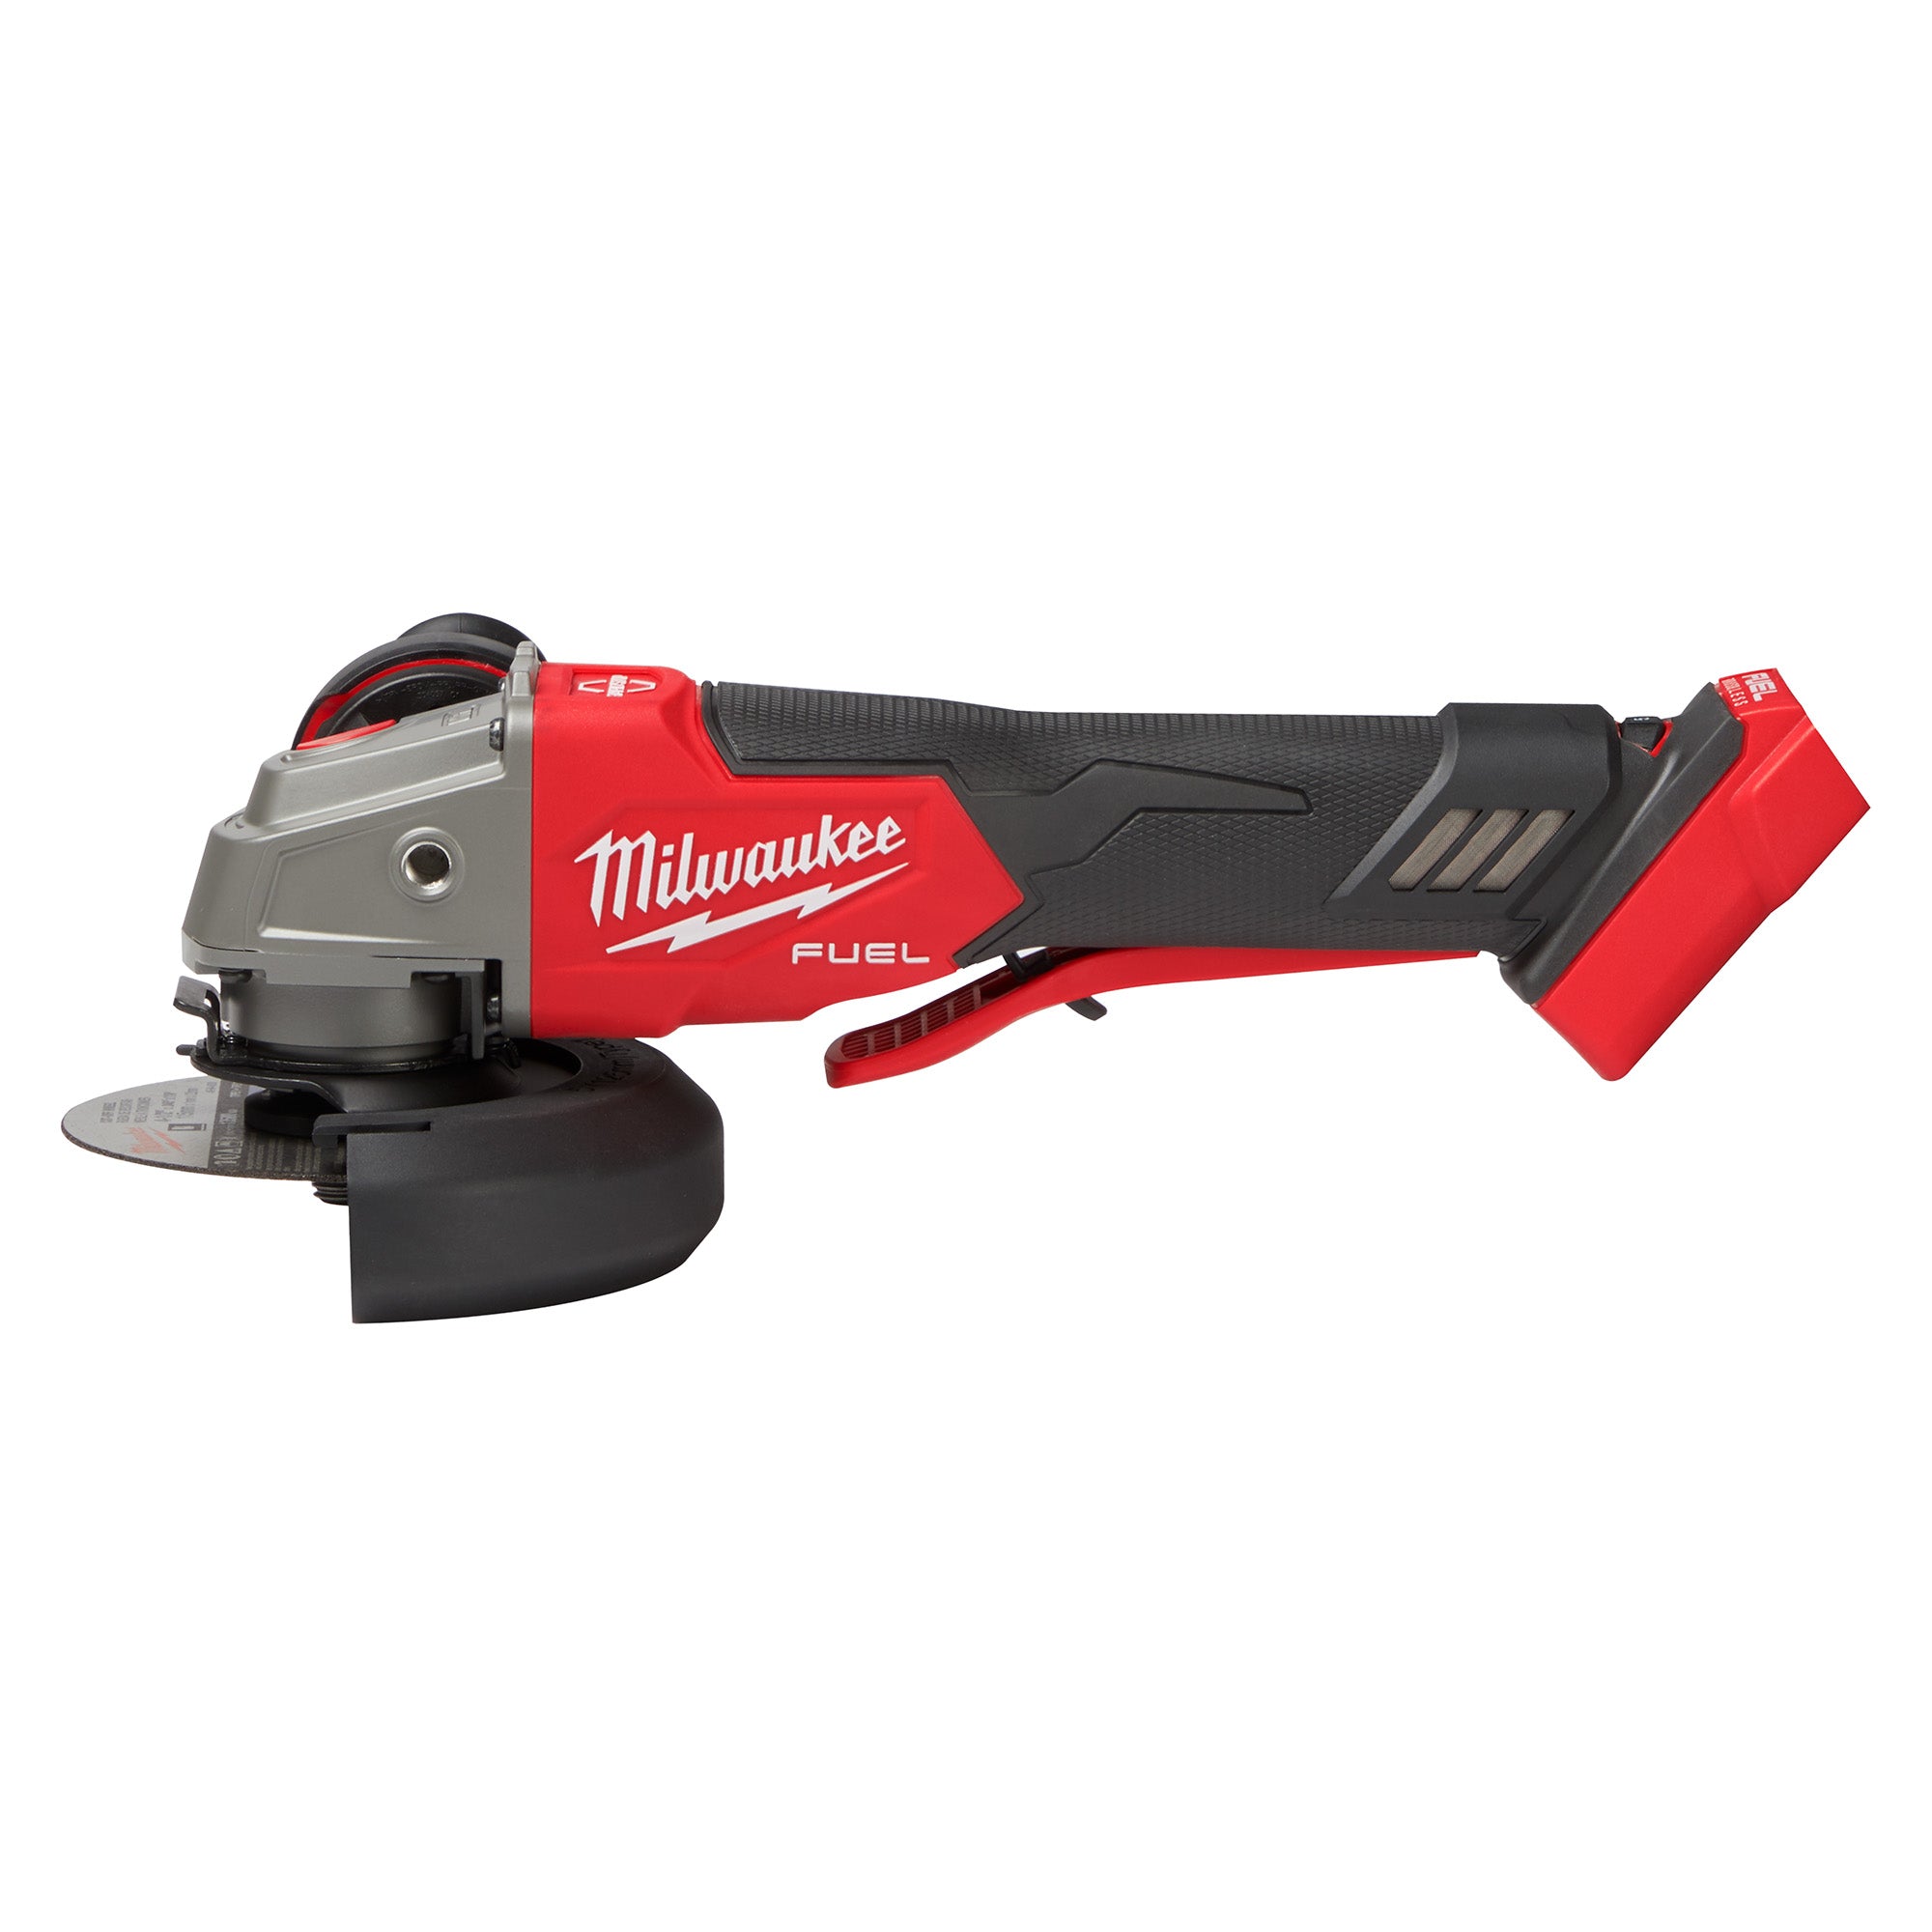 18V M18 FUEL Lithium-Ion Brushless Cordless 4-1/2" / 5" Variable Speed Braking Paddle Switch No-Lock Grinder (Tool Only)